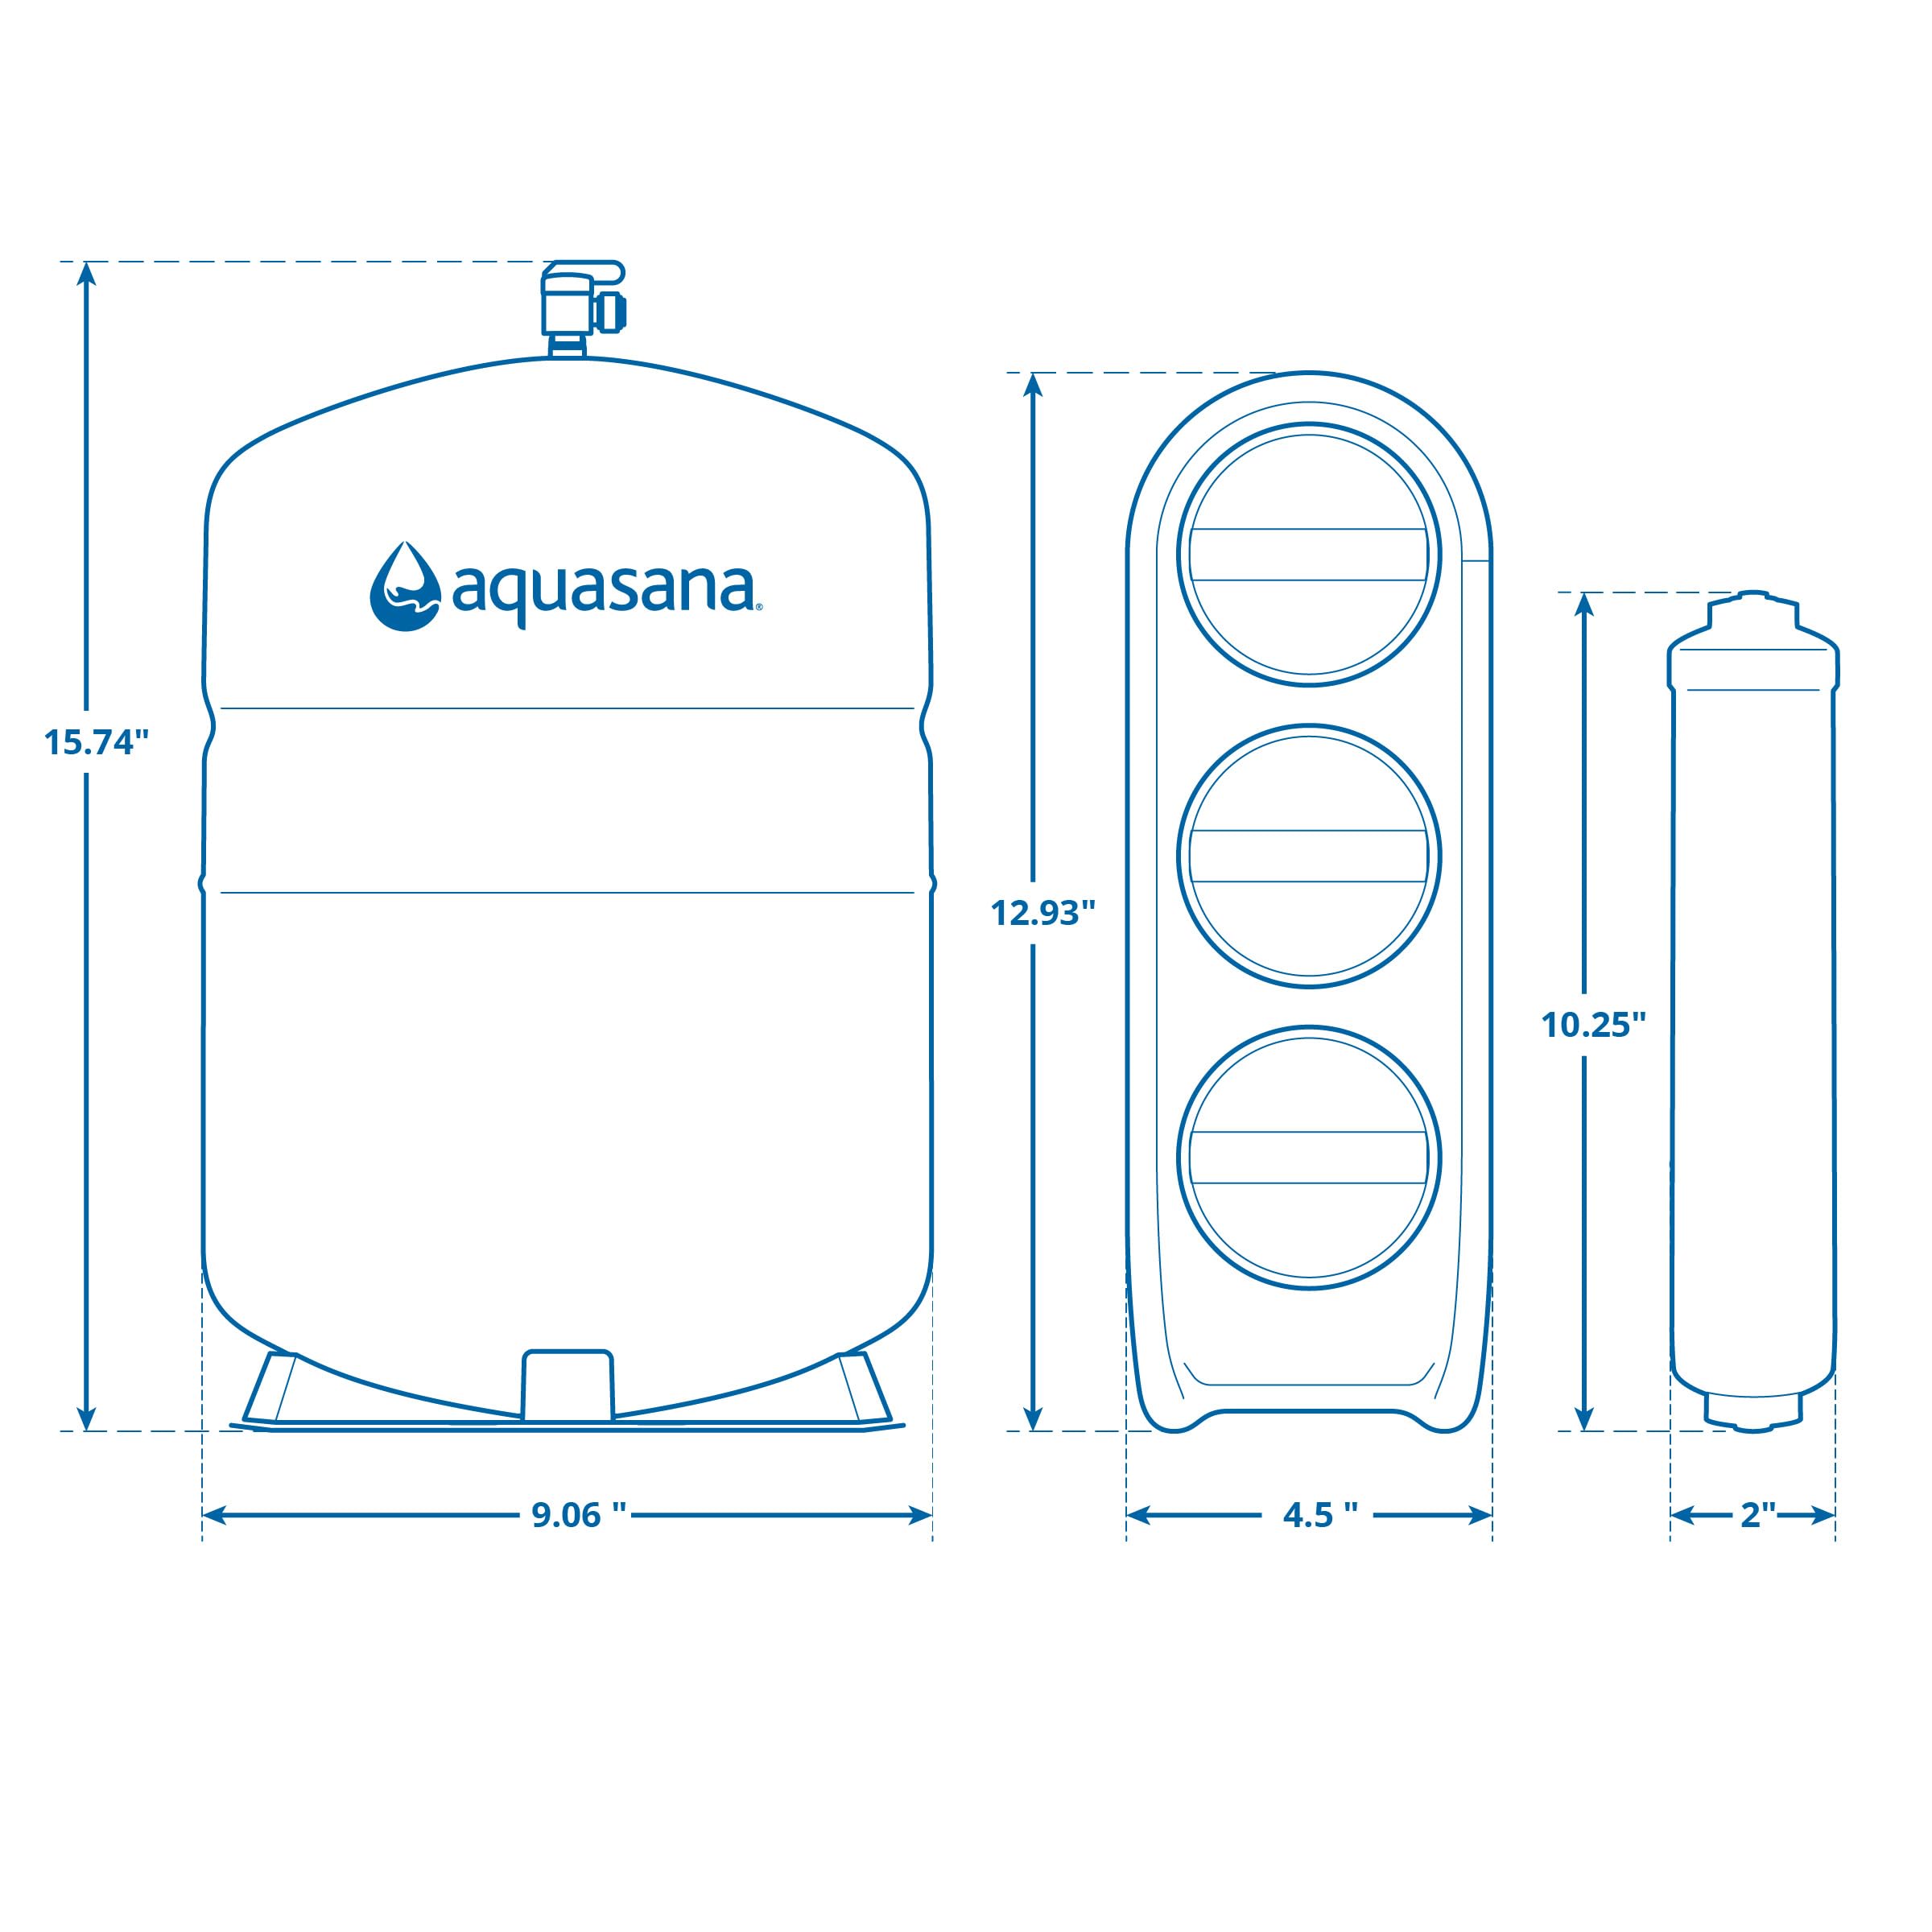 Aquasana SmartFlow™ Reverse Osmosis Water Filter System - High-Efficiency Under Sink RO Removes up to 99.99% of 90 Contaminants, Including Fluoride, Arsenic, Chlorine, and Lead - Brushed Nickel Faucet